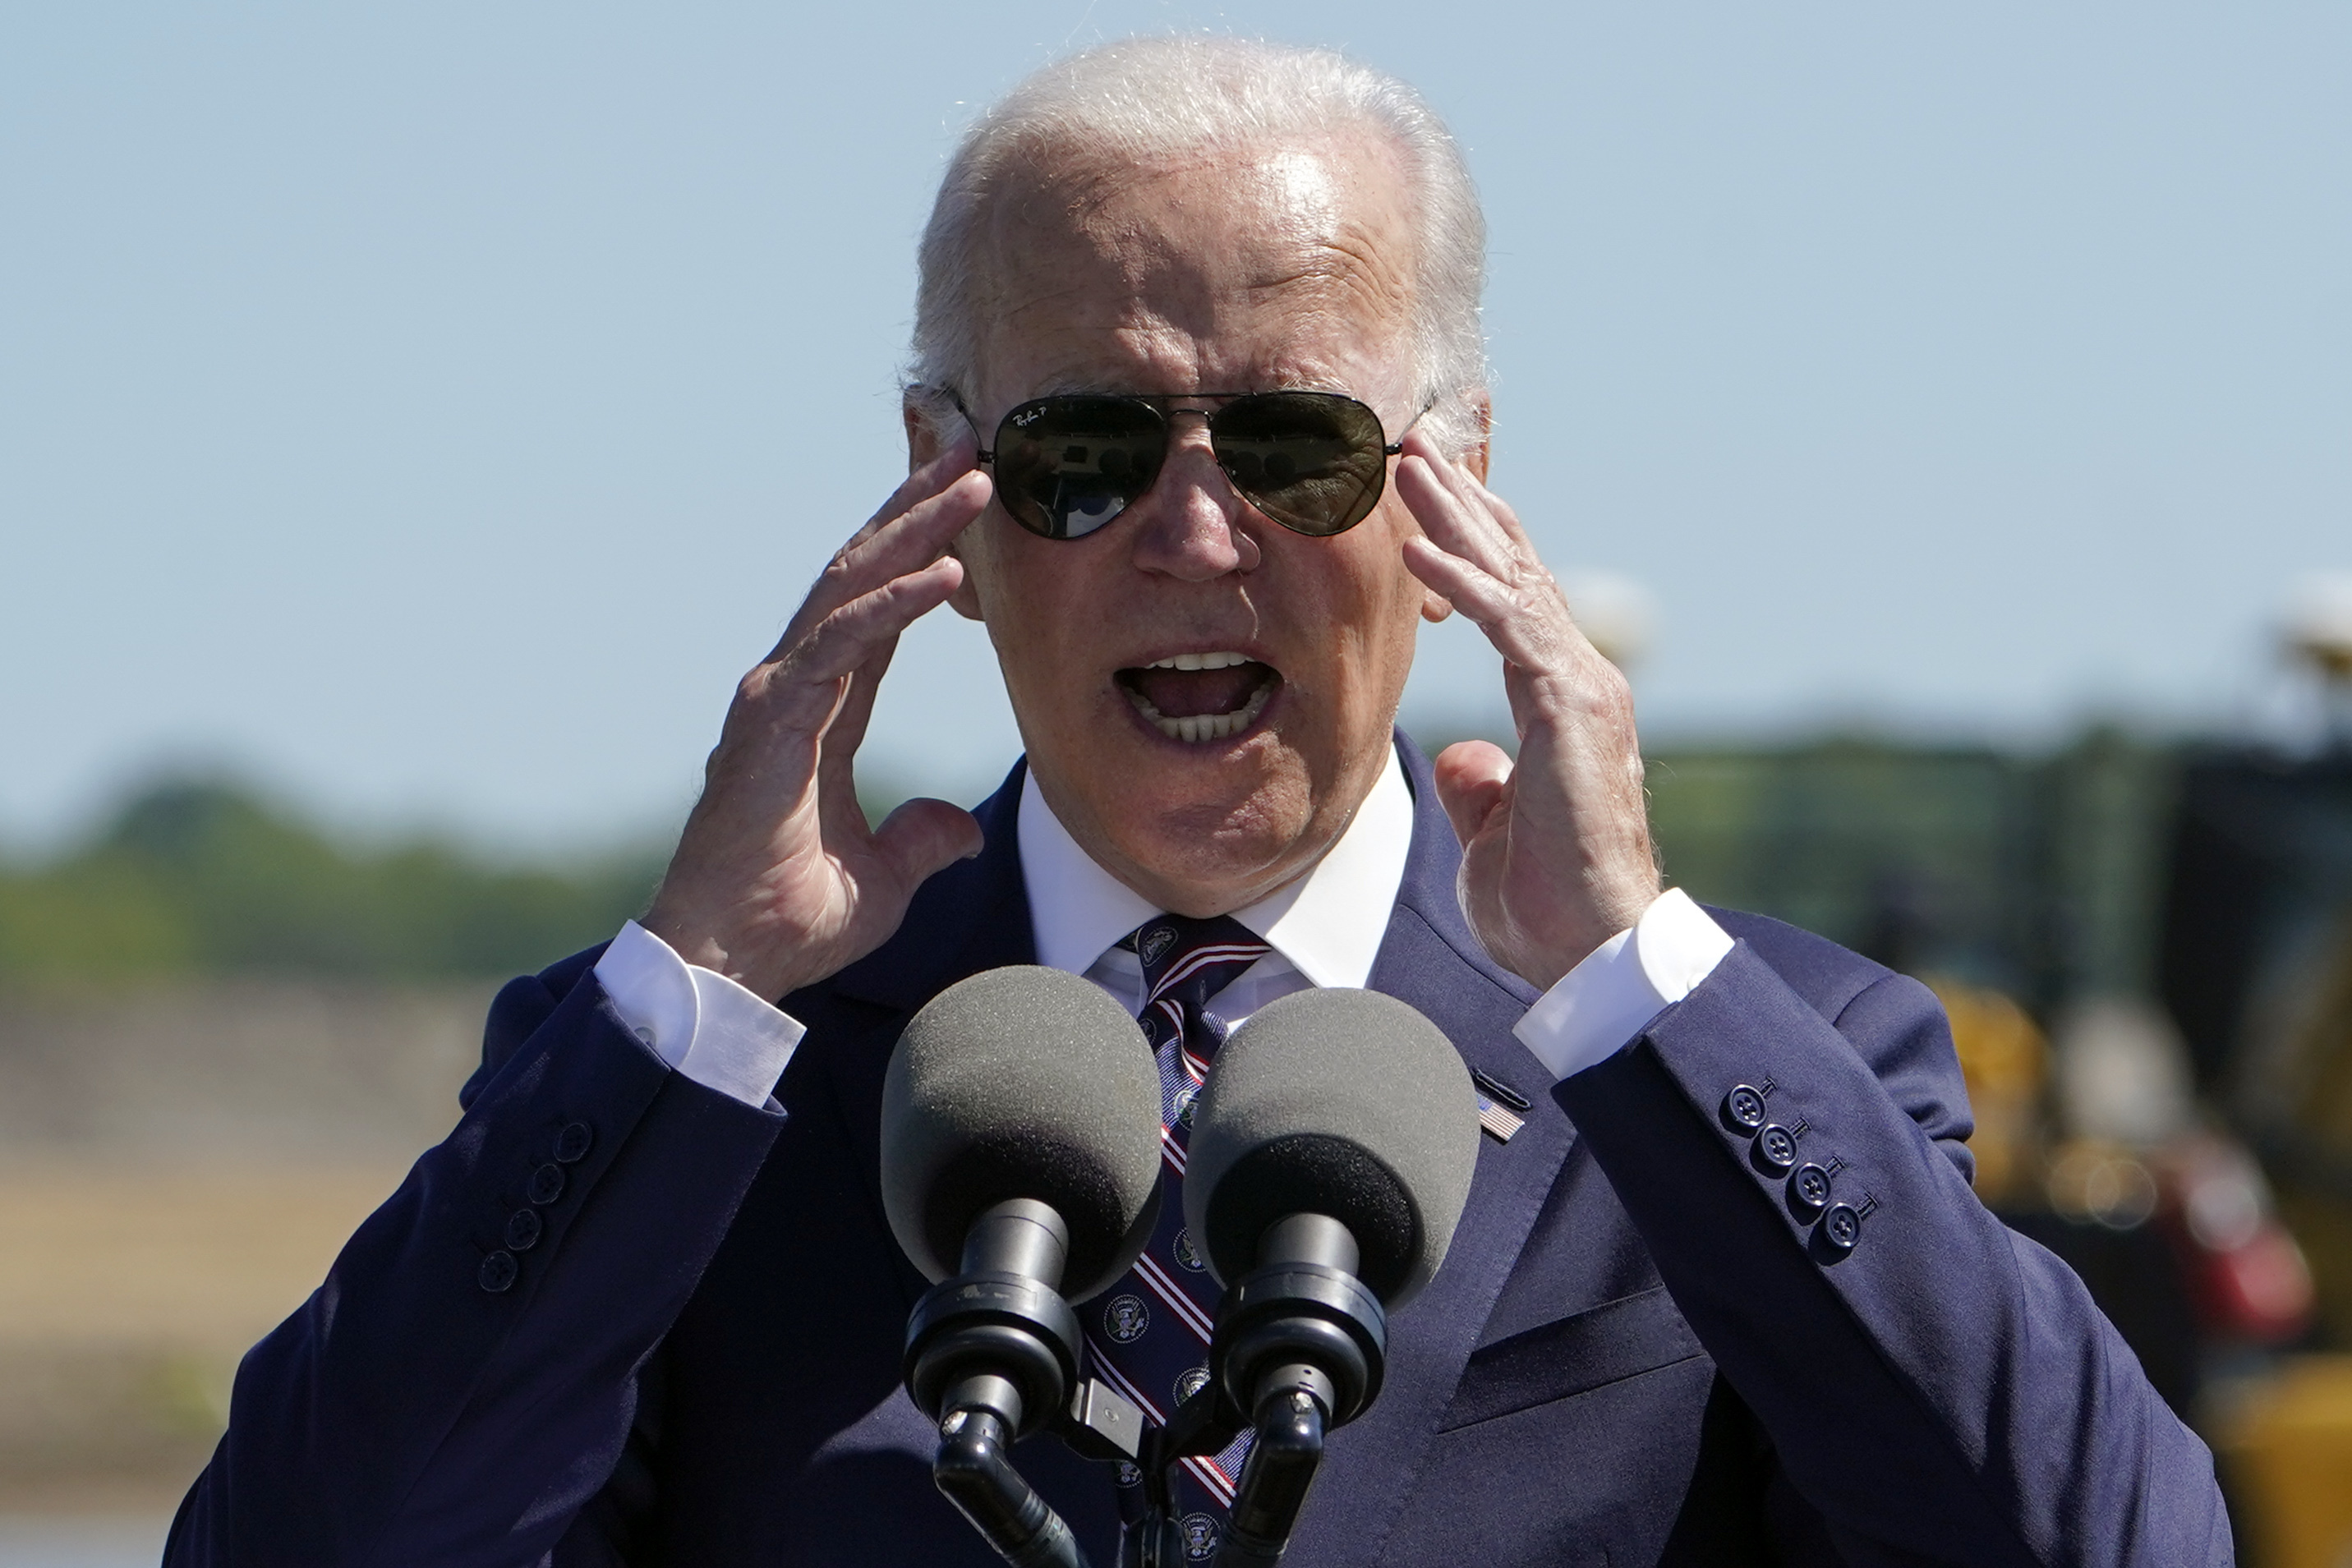 ident Joe Biden speaks during a groundbreaking for a new Intel computer chip facility in New Albany, Ohio, Friday, Sep. 9, 2022. (AP Photo/Manuel Balce Ceneta)